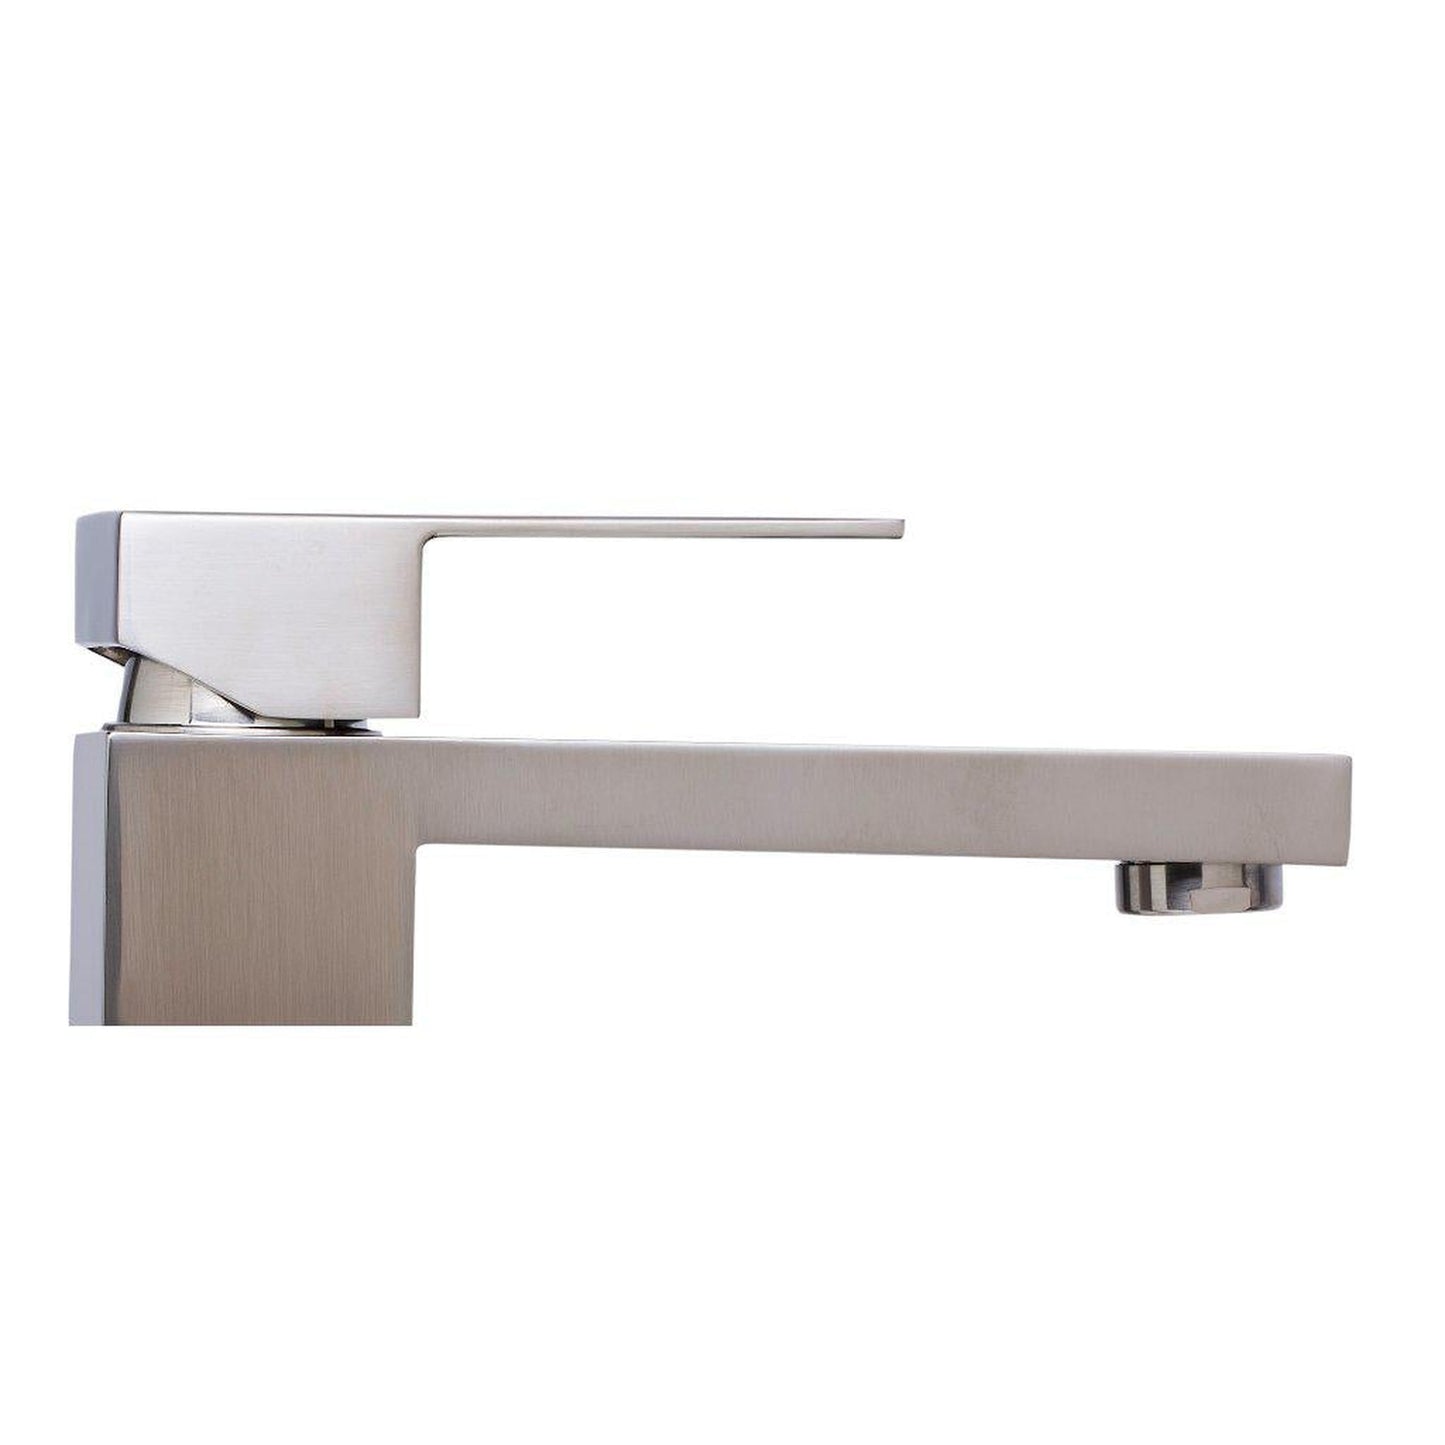 ALFI Brand AB1129-BN Brushed Nickel Vessel Square Spout Brass Bathroom Sink Faucet With Single Lever